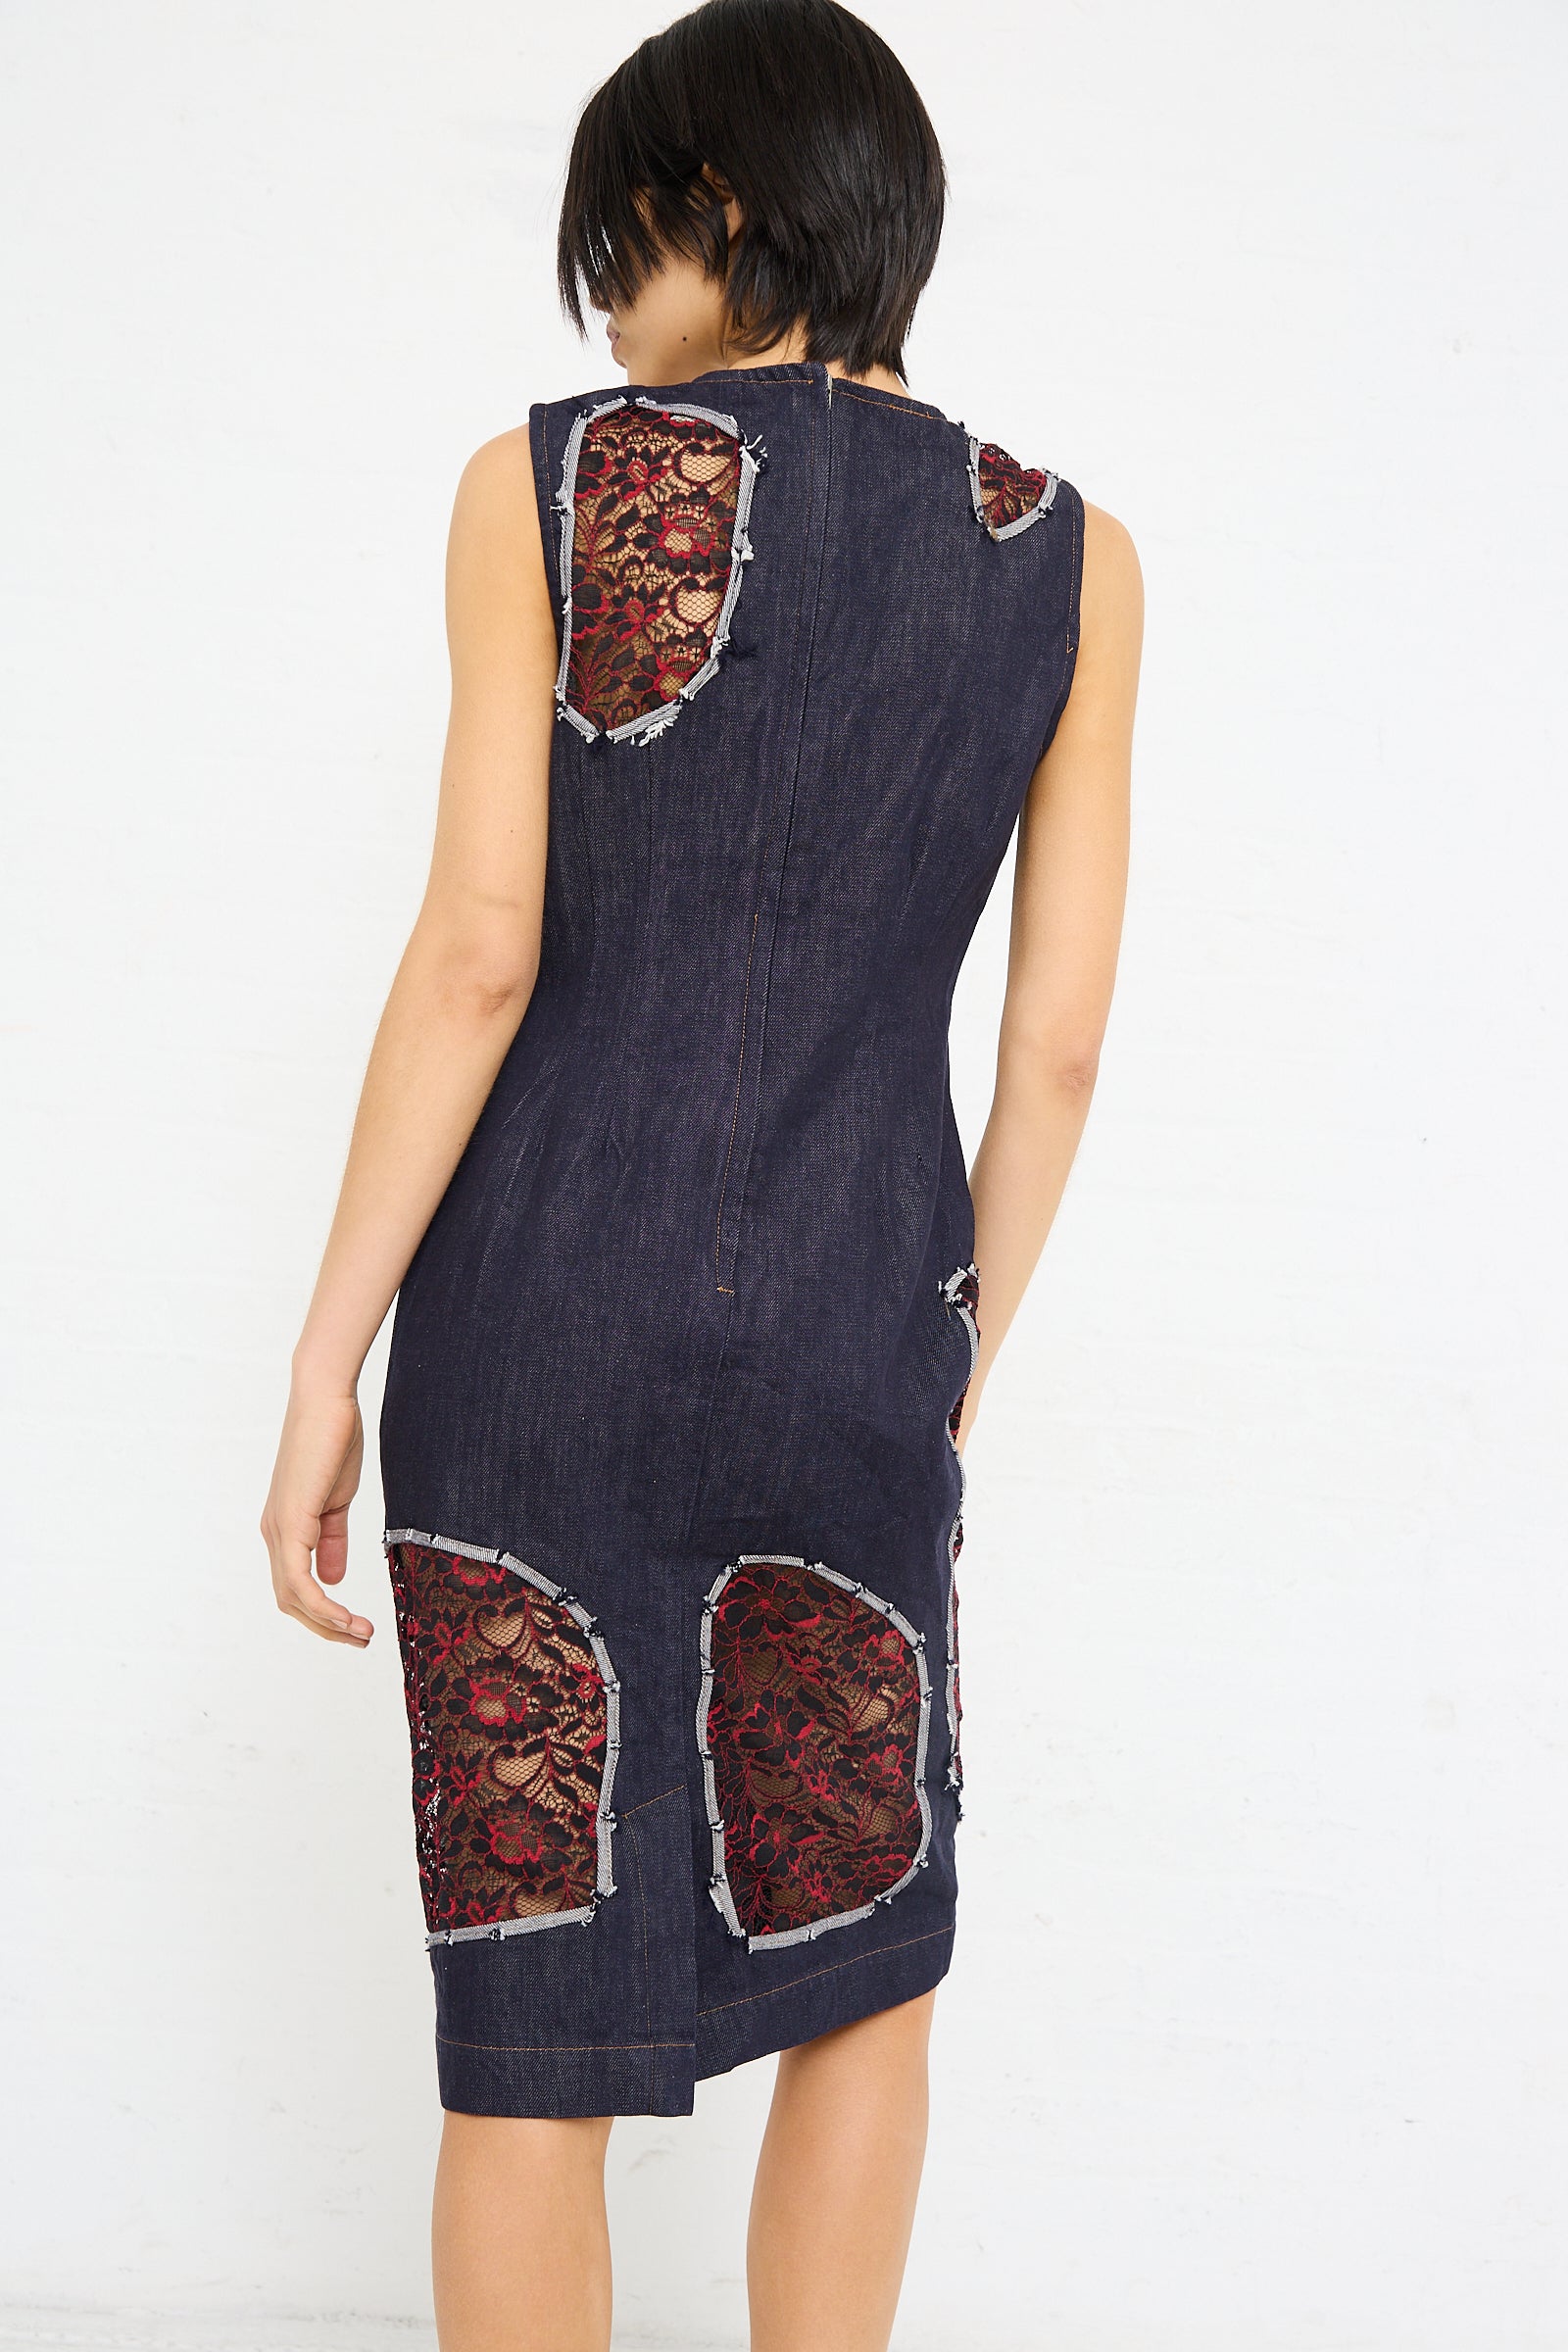 A woman from behind wearing a sleeveless Denim Motto Dress in Weft with cutout lace detailing by SC103.